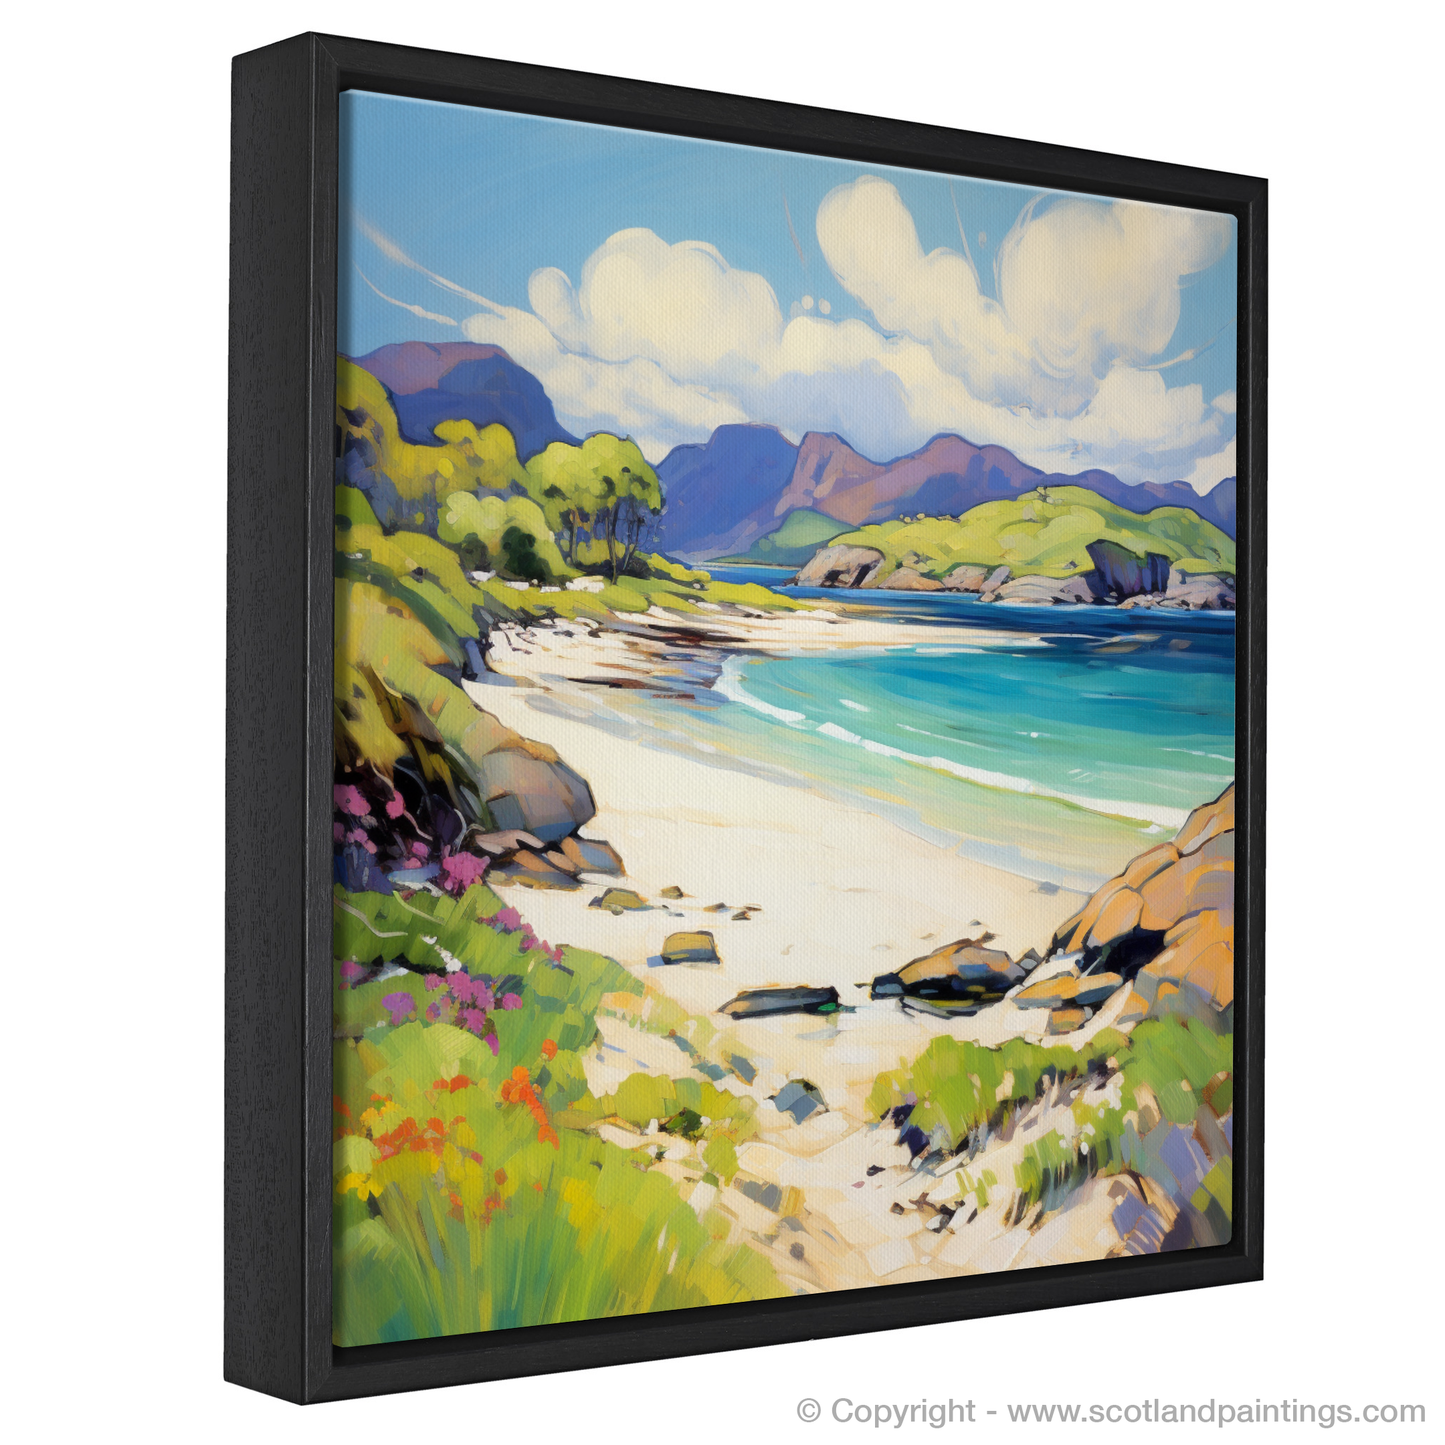 Painting and Art Print of Silver Sands of Morar in summer entitled "Fauvist Vibrance: Summer at Silver Sands of Morar".